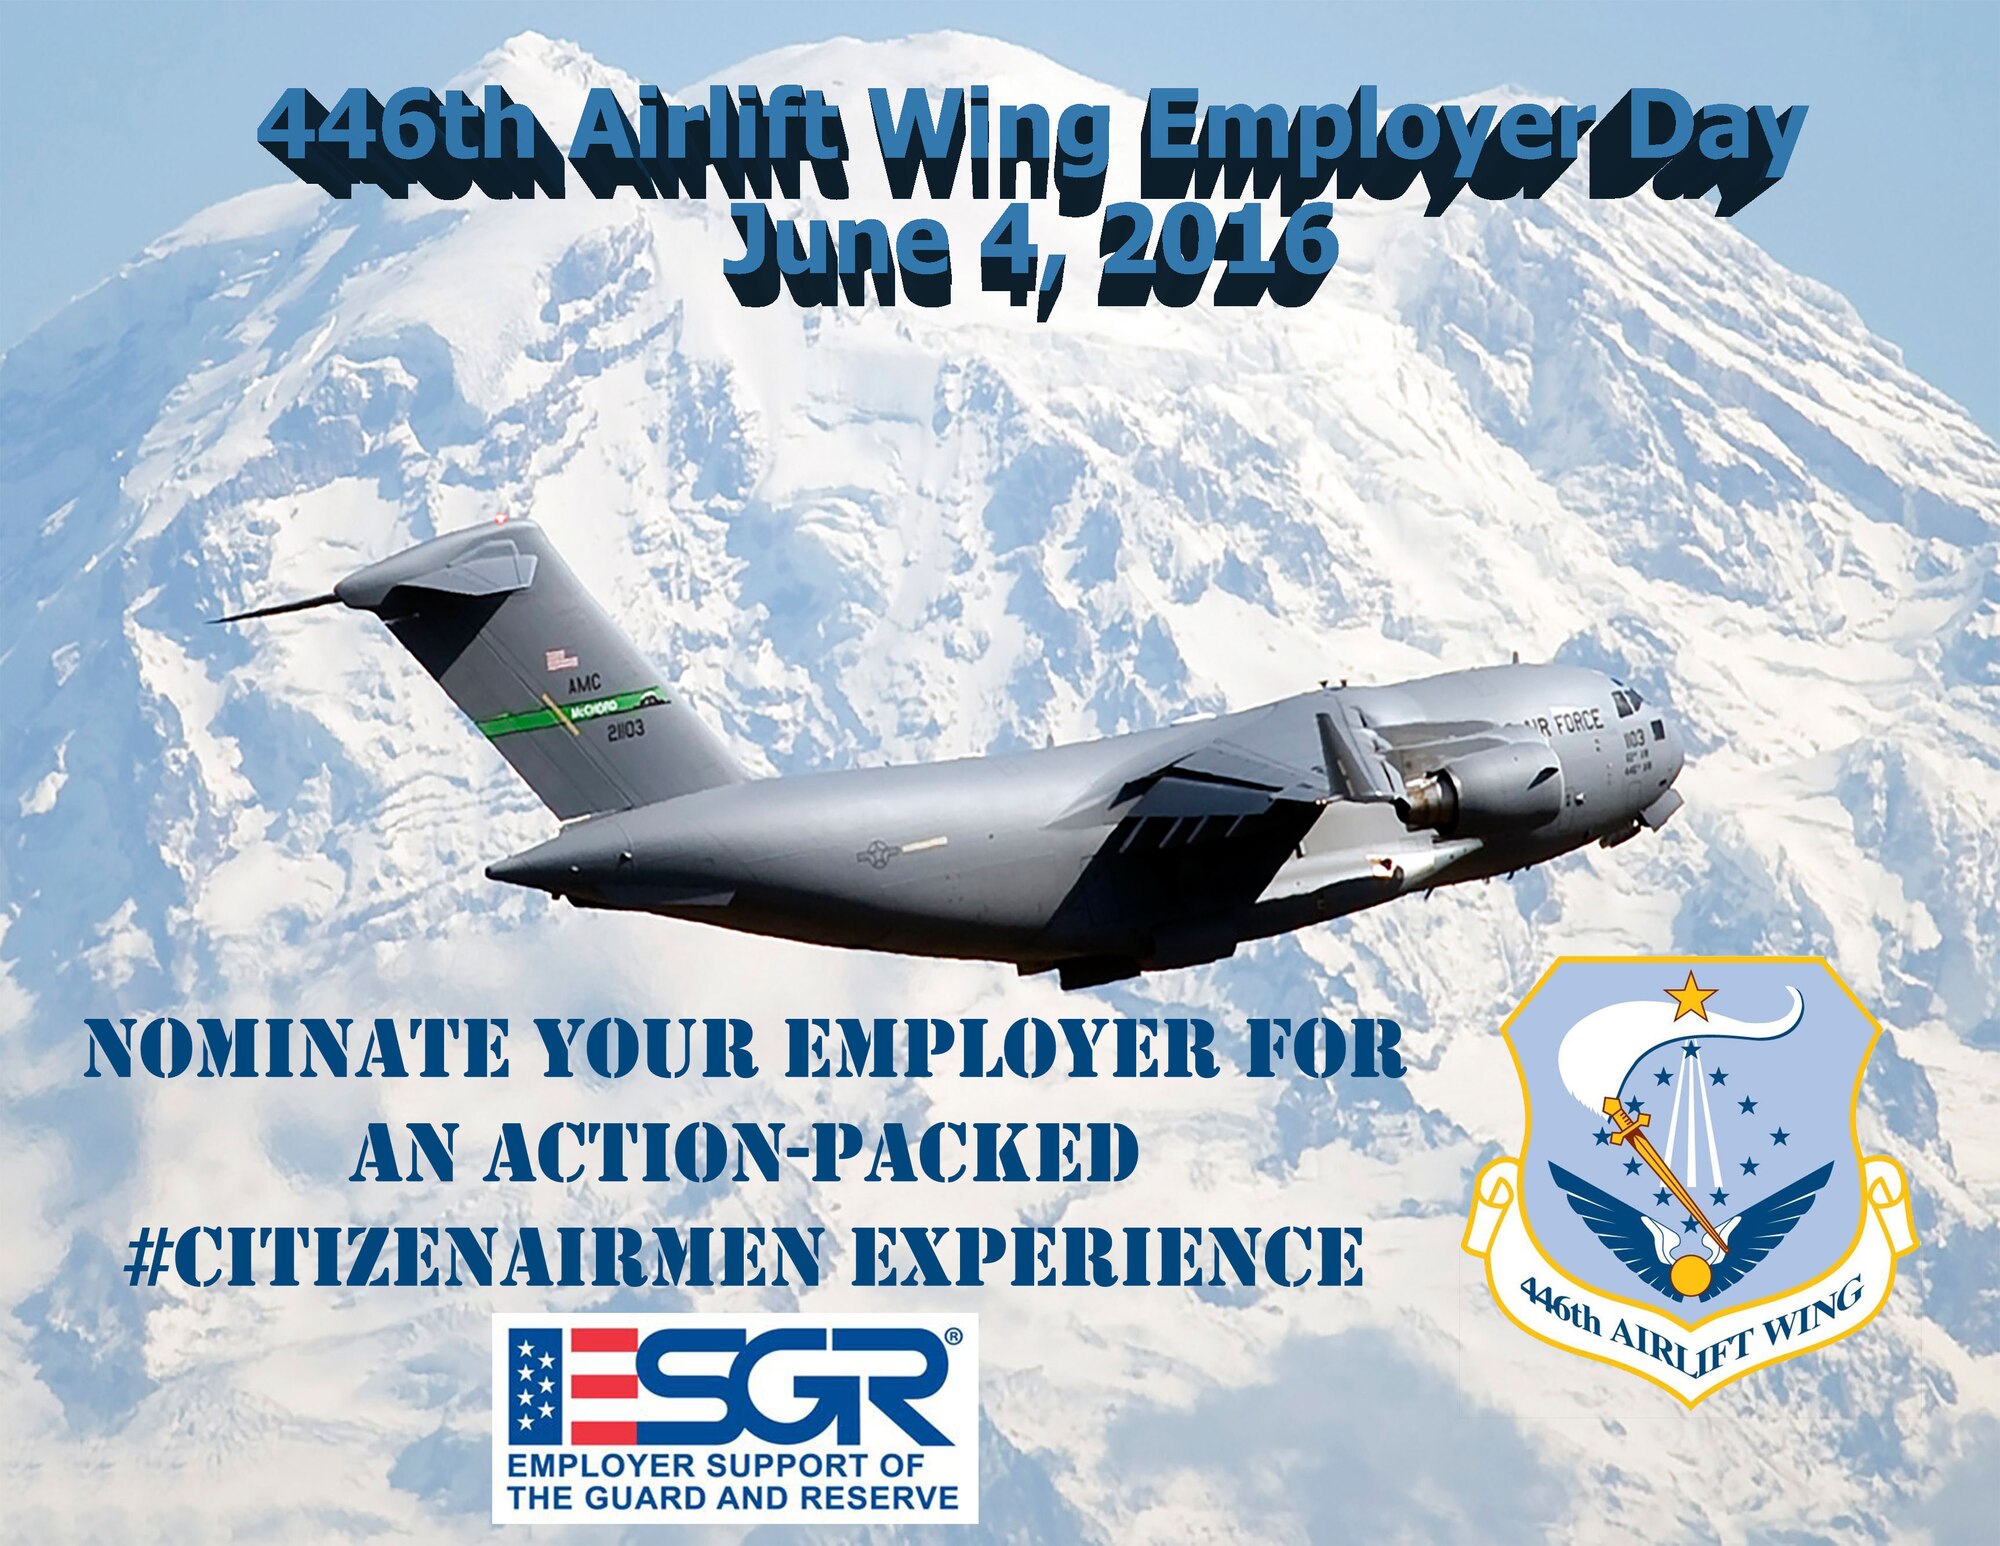 The next Employer Support of the Guard and Reserve employer orientation day is June 4. Reservists can nominate their immediate supervisor, human resources specialists, or an executive or owner of the business they work for, to spend the day with the wing learning about the Air Force Reserve, the 446th Airlift Wing and its missions, and how Citizen Airmen serve. To nominate an employer, check out https://einvitations.afit.edu/inv/anim.cfm?i=290430&k=0068420D7857. 